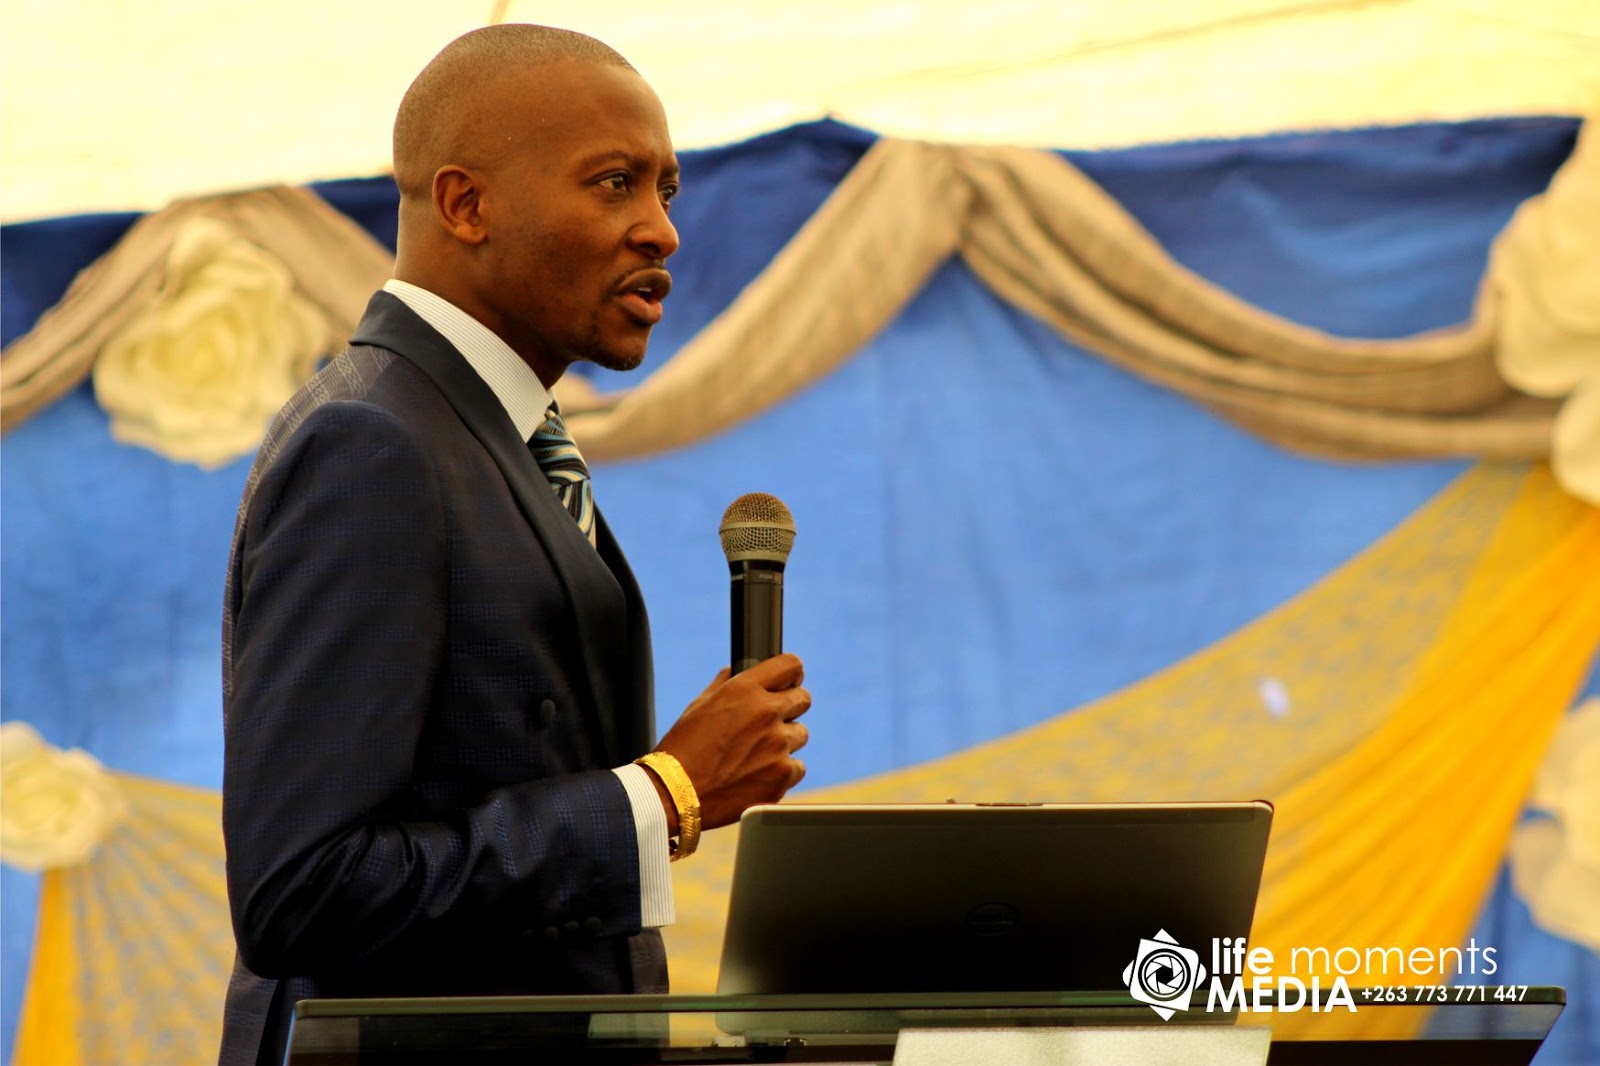 Honour - What Does That Mean with Apostle B. Java (Founder's Day Notes)  Captured By: Life Moments Media